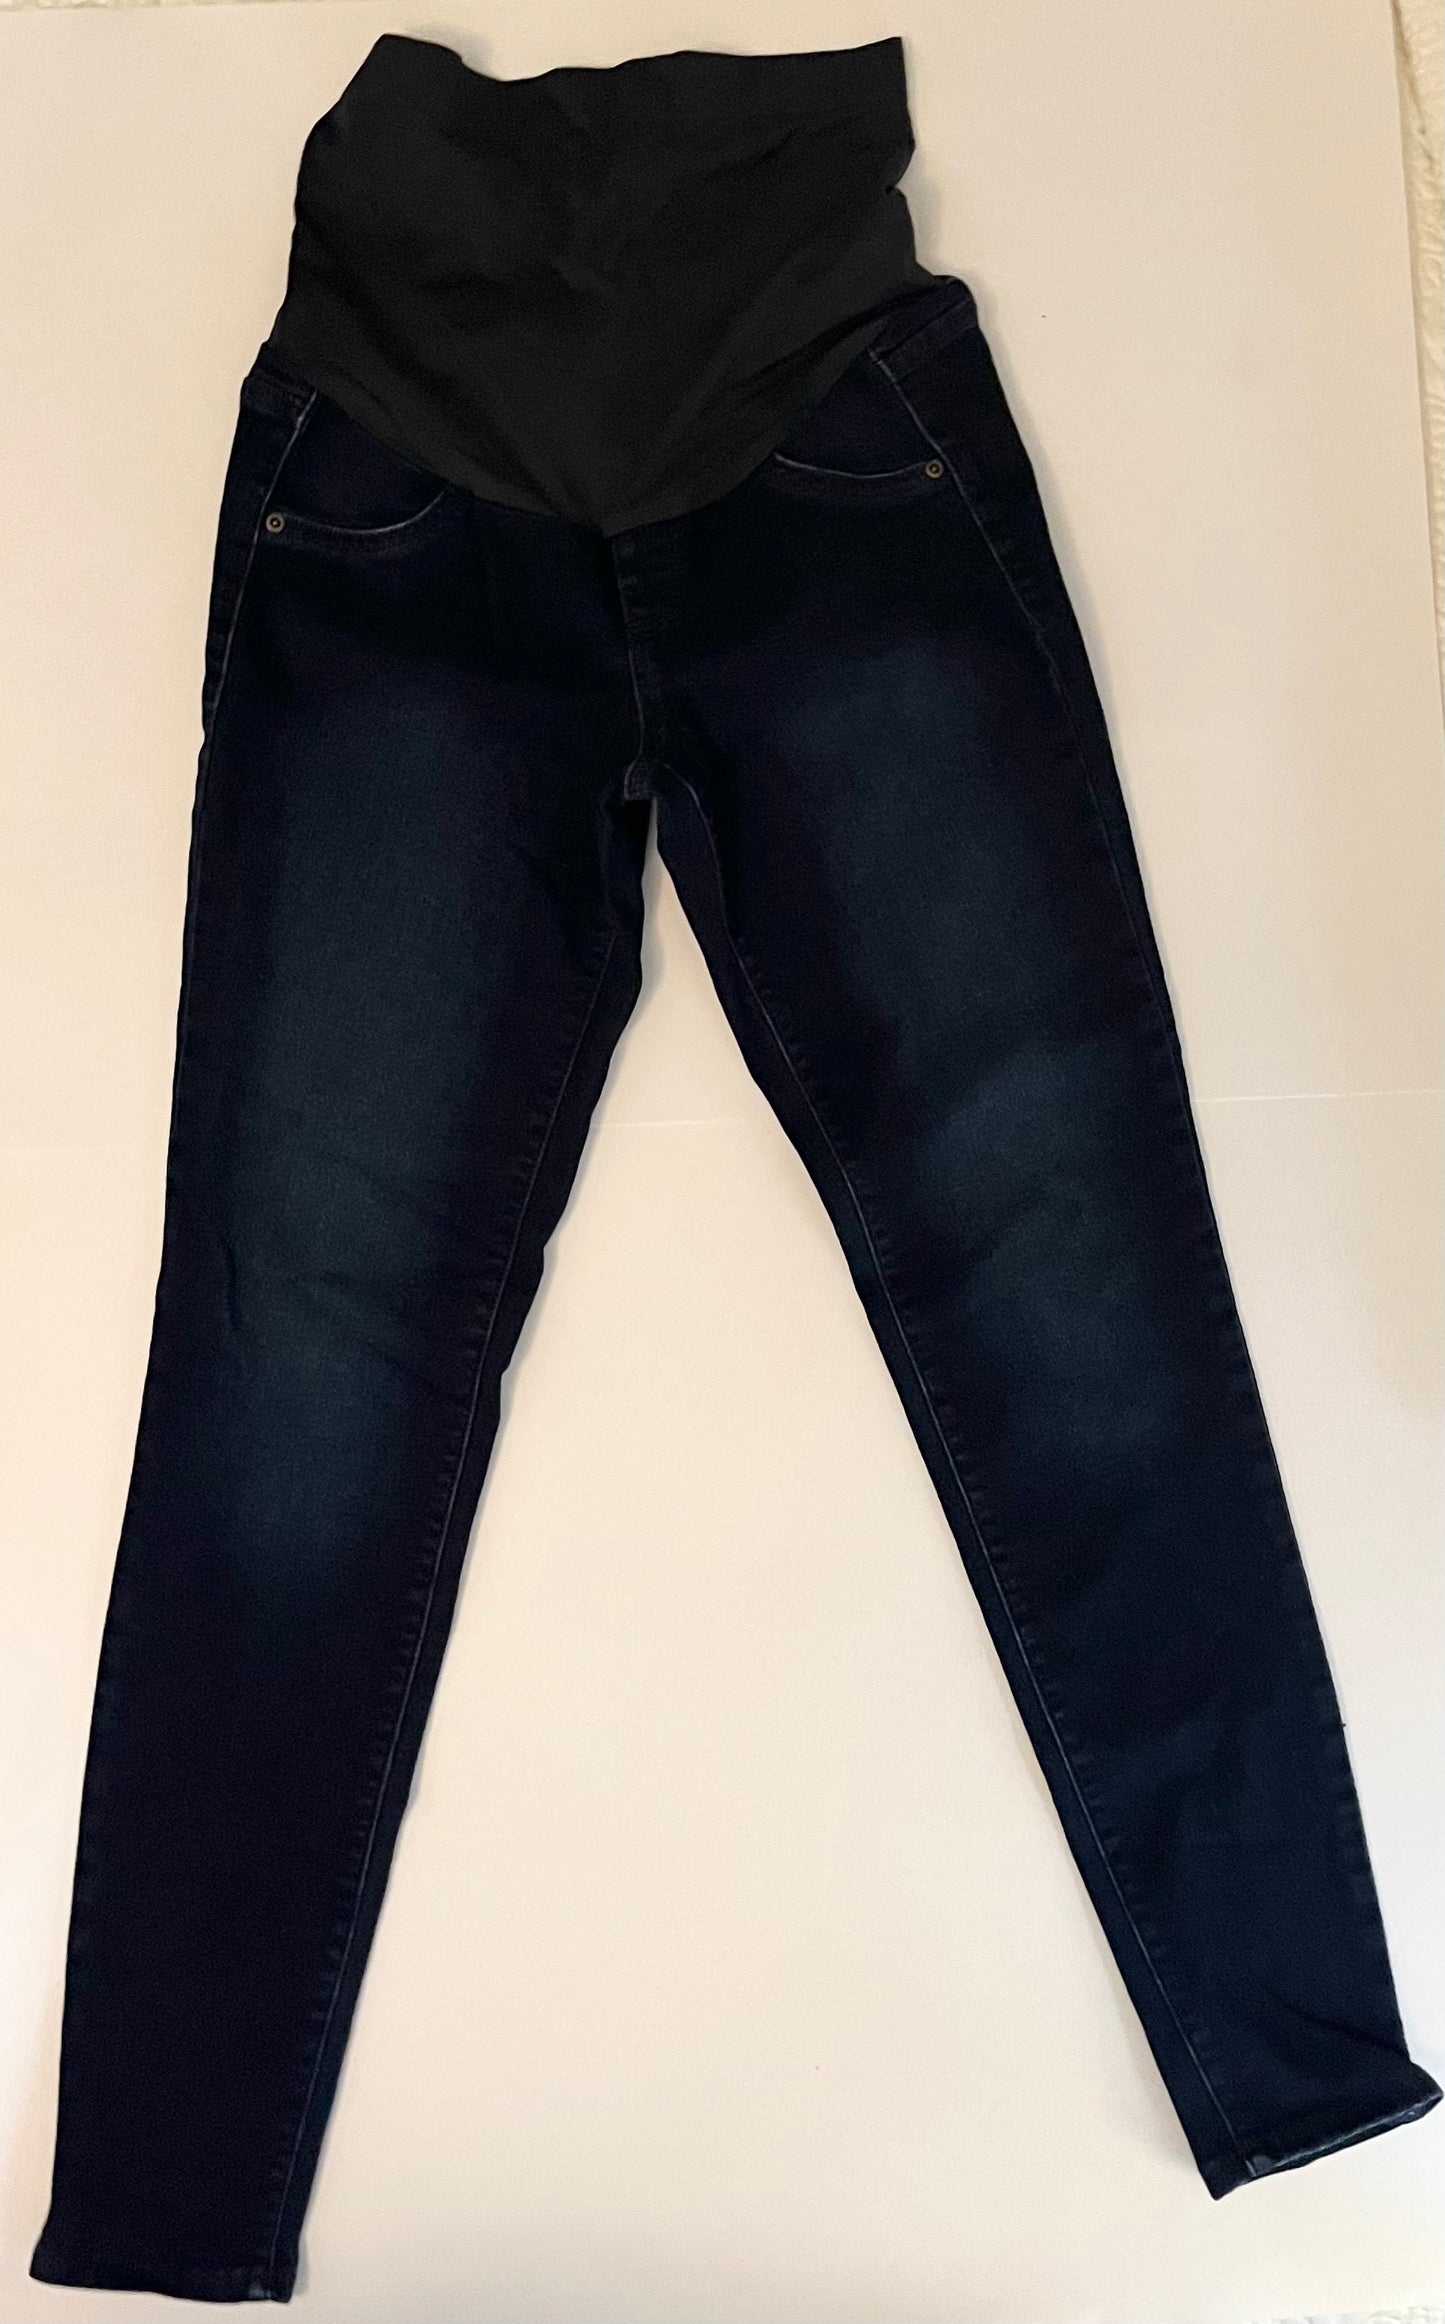 A Glow size 4 Maternity Jeans Jeggings